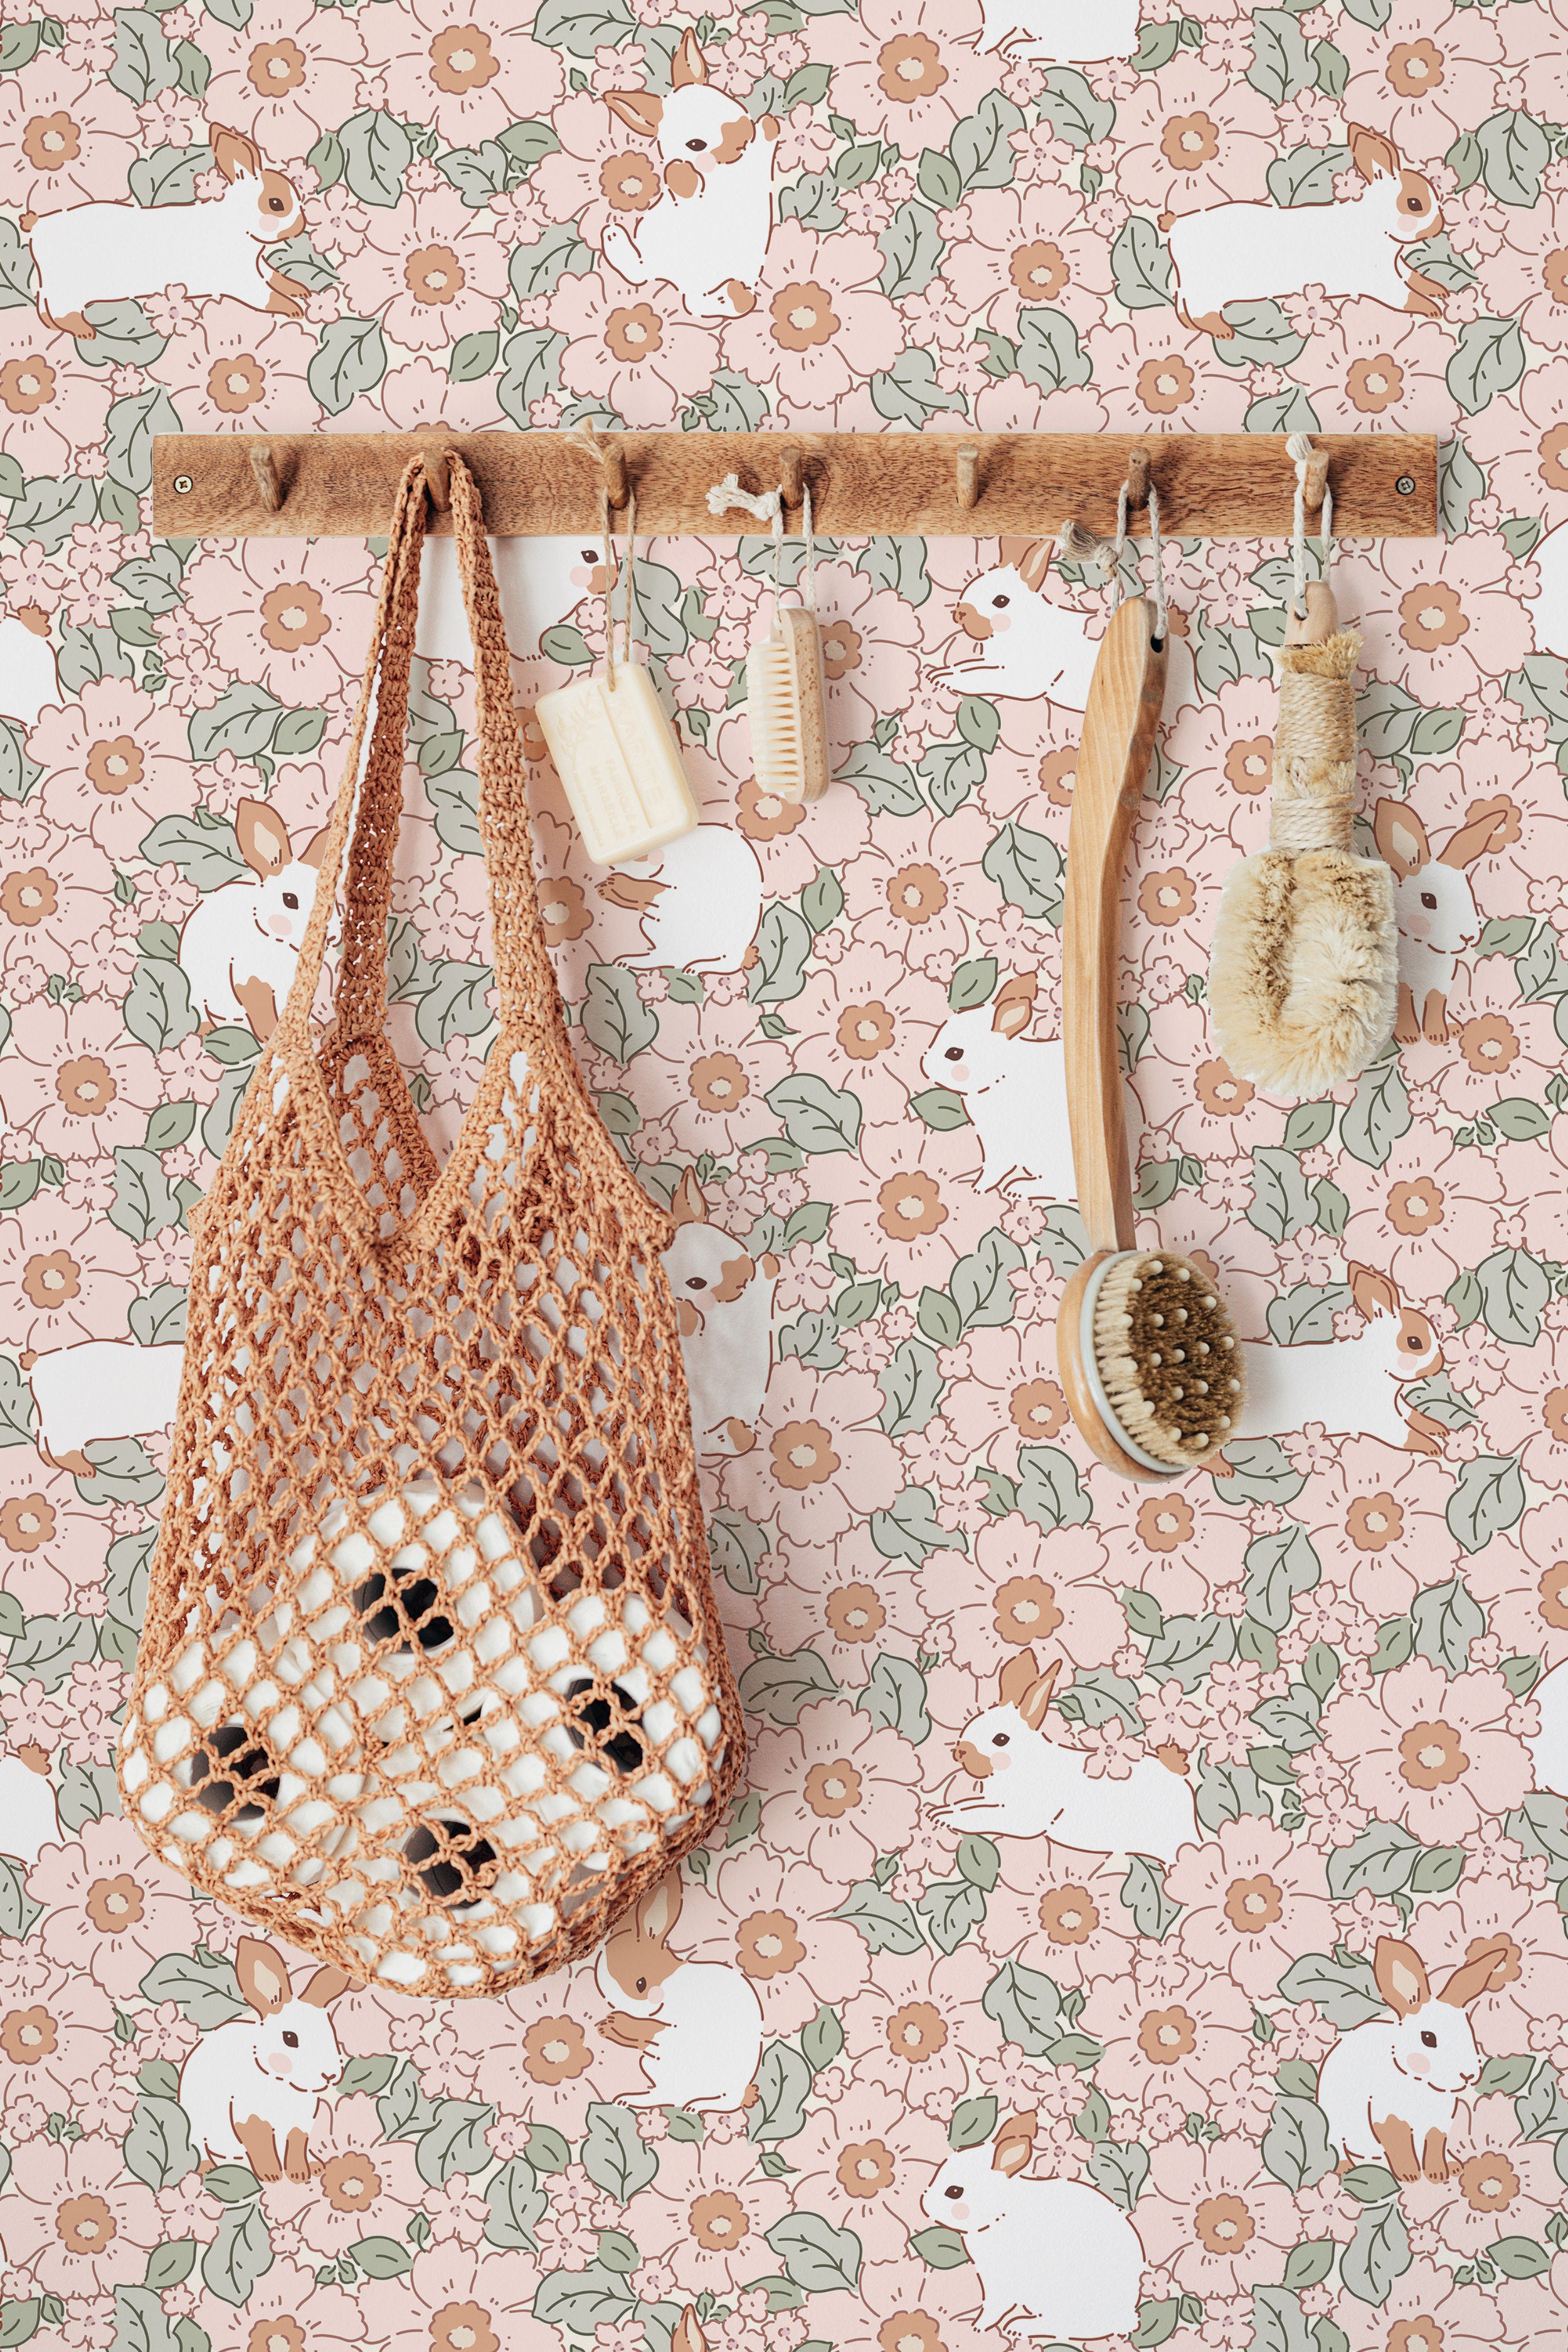 A charming scene showcasing the Petite Lapinou Wallpaper, adorned with whimsical illustrations of white rabbits amidst a floral pattern of pink and green. The wallpaper serves as a backdrop for a wooden rack hung with a netted bag and wooden brushes, enhancing the pastoral and serene feel of the setting.